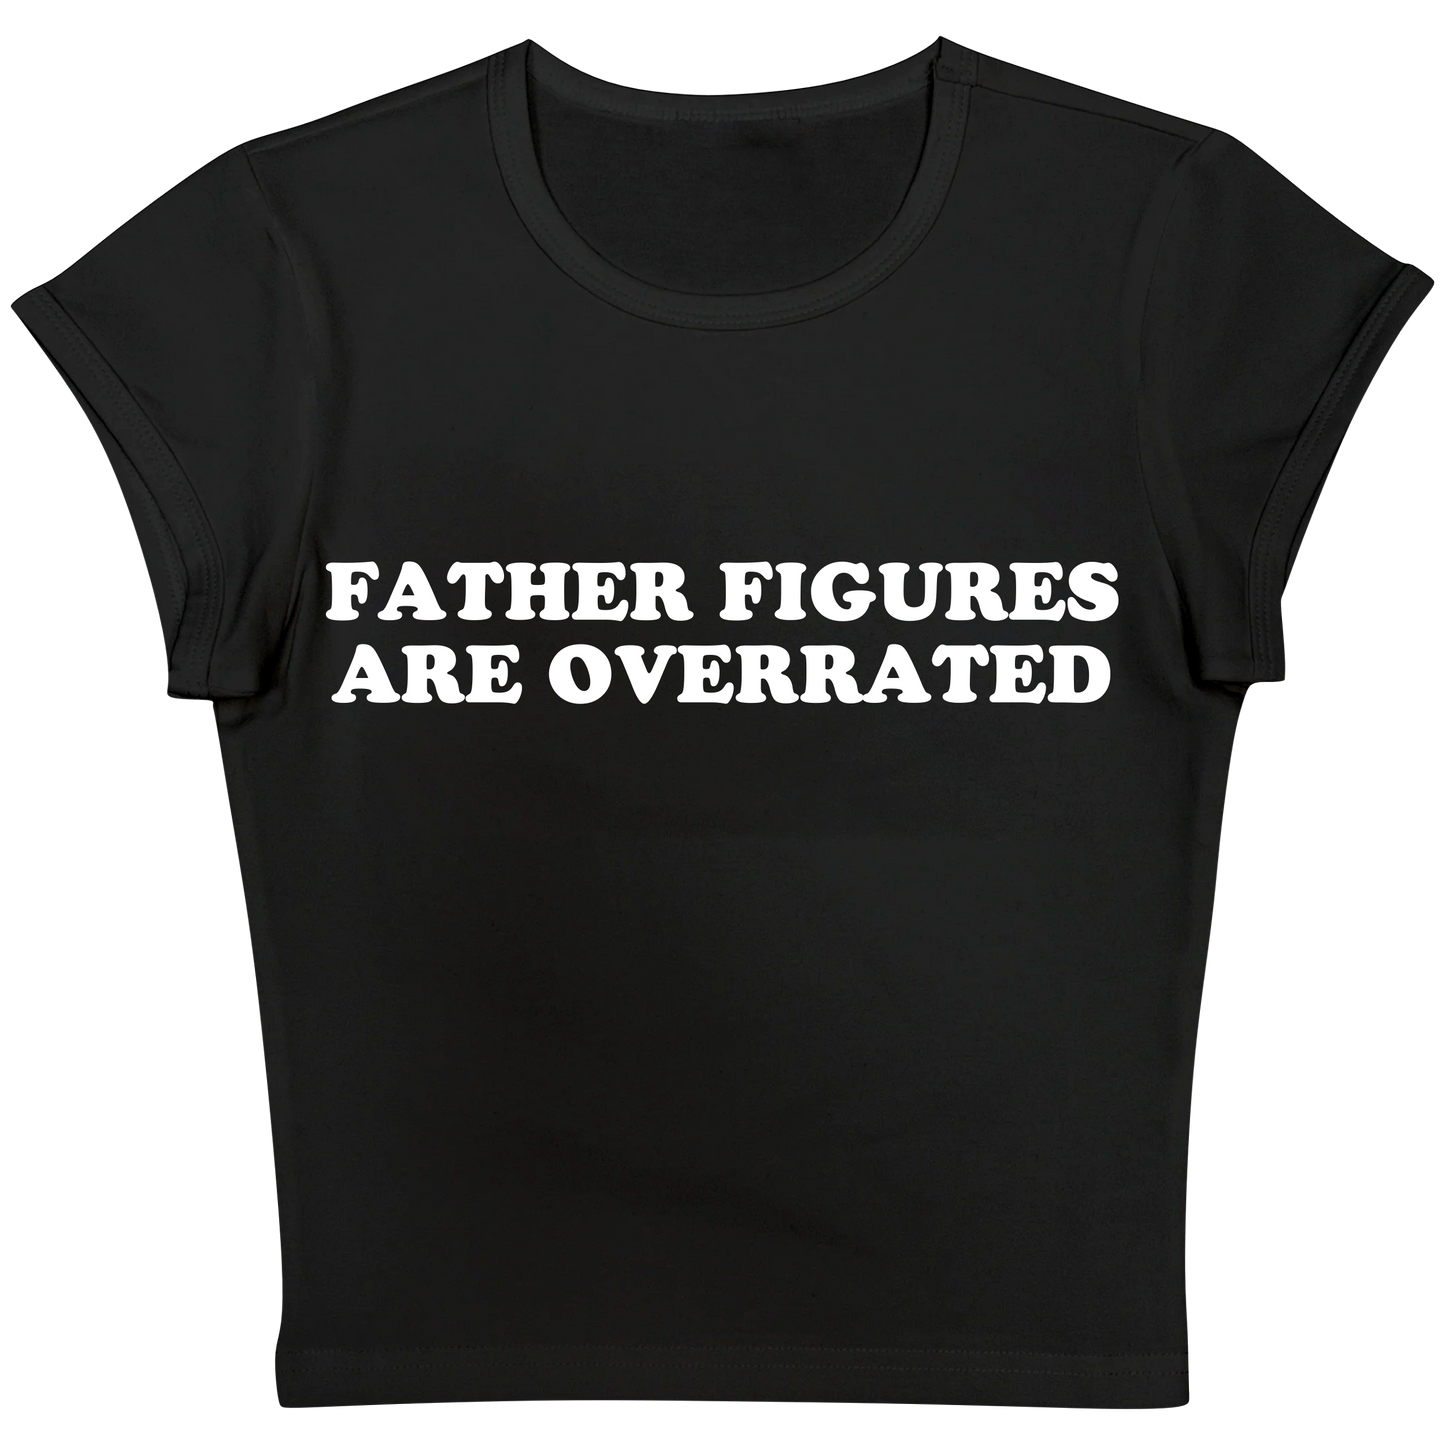 Father Figures Are Overrated Baby tee